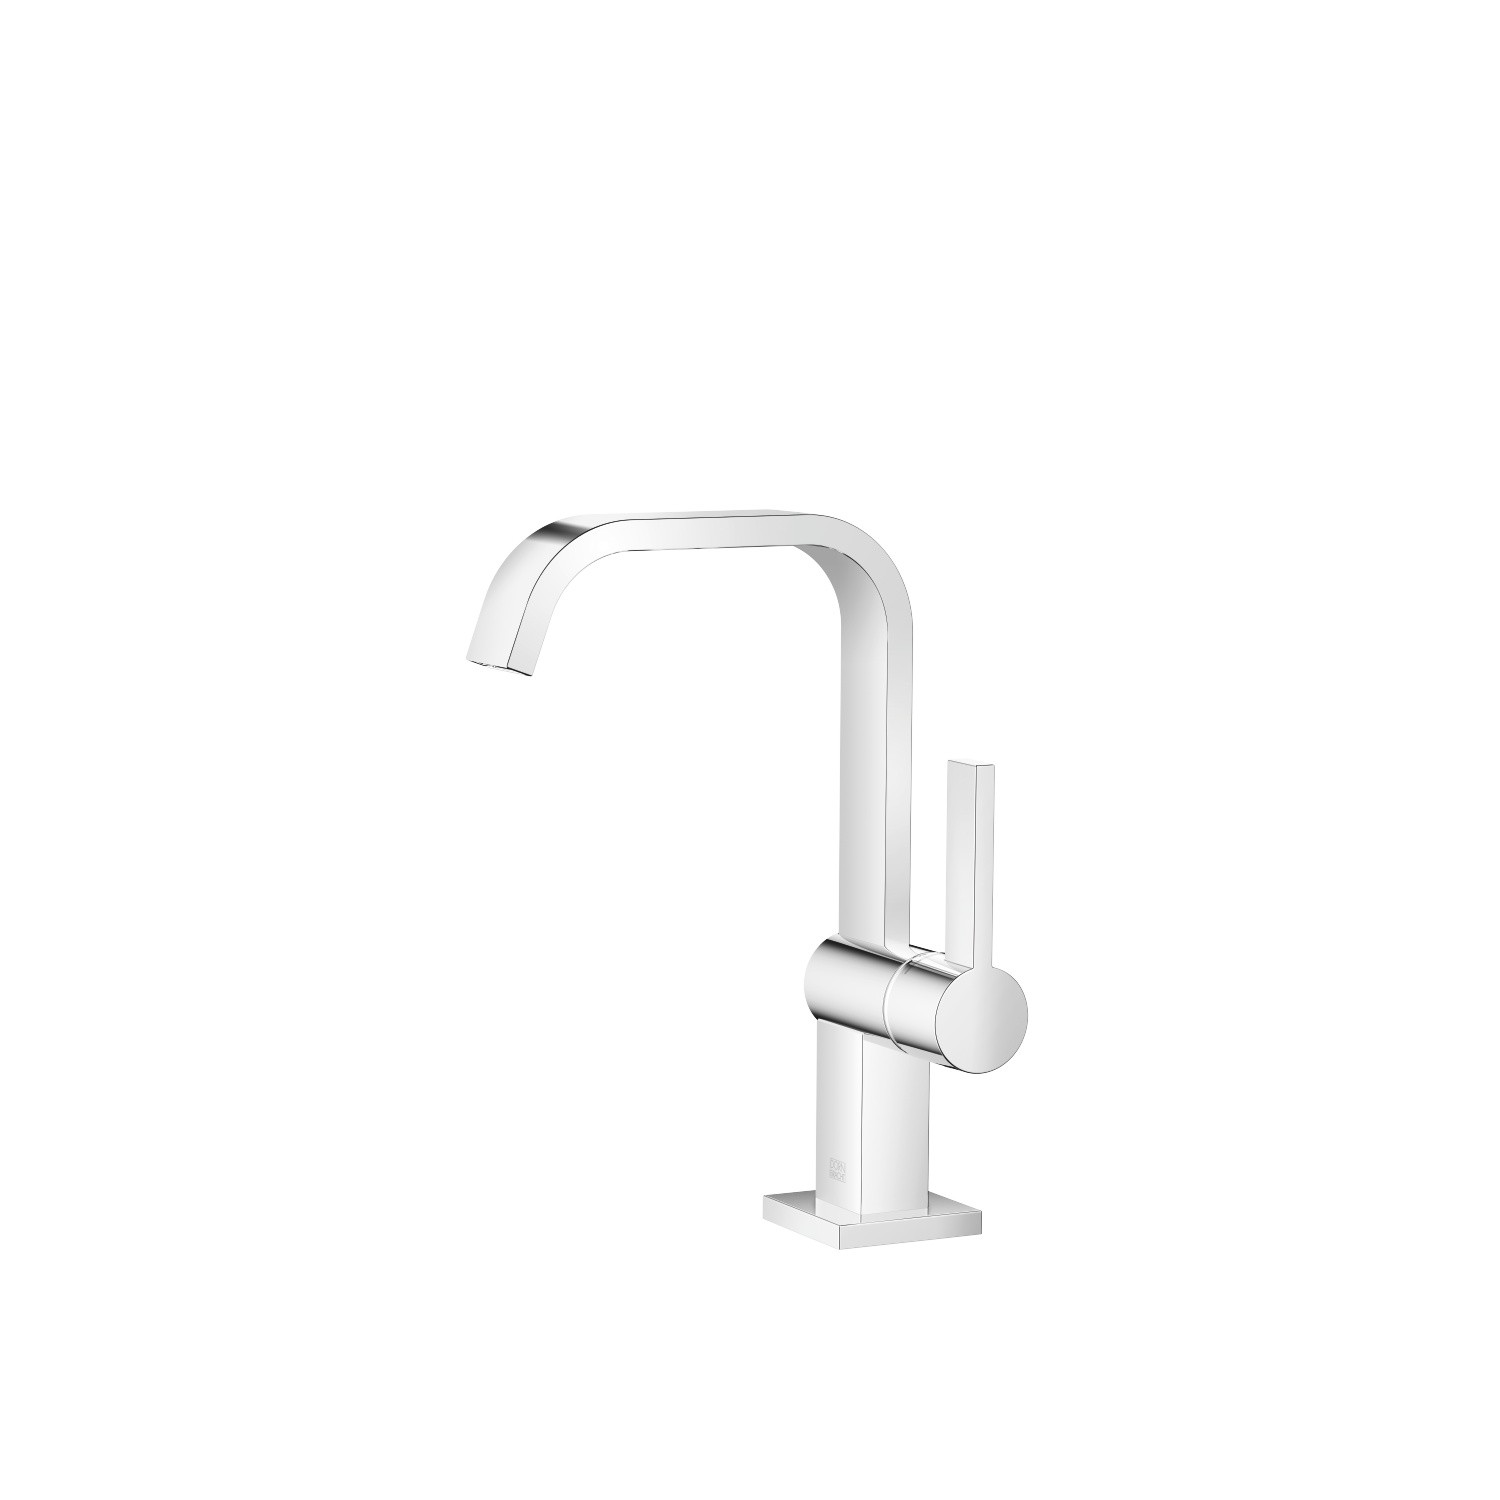 DORNBRACHT 33526670-0010 IMO 10 3/8 INCH SINGLE HOLE DECK MOUNT LAVATORY MIXER WITH RAISED SPOUT AND BLADE HANDLE